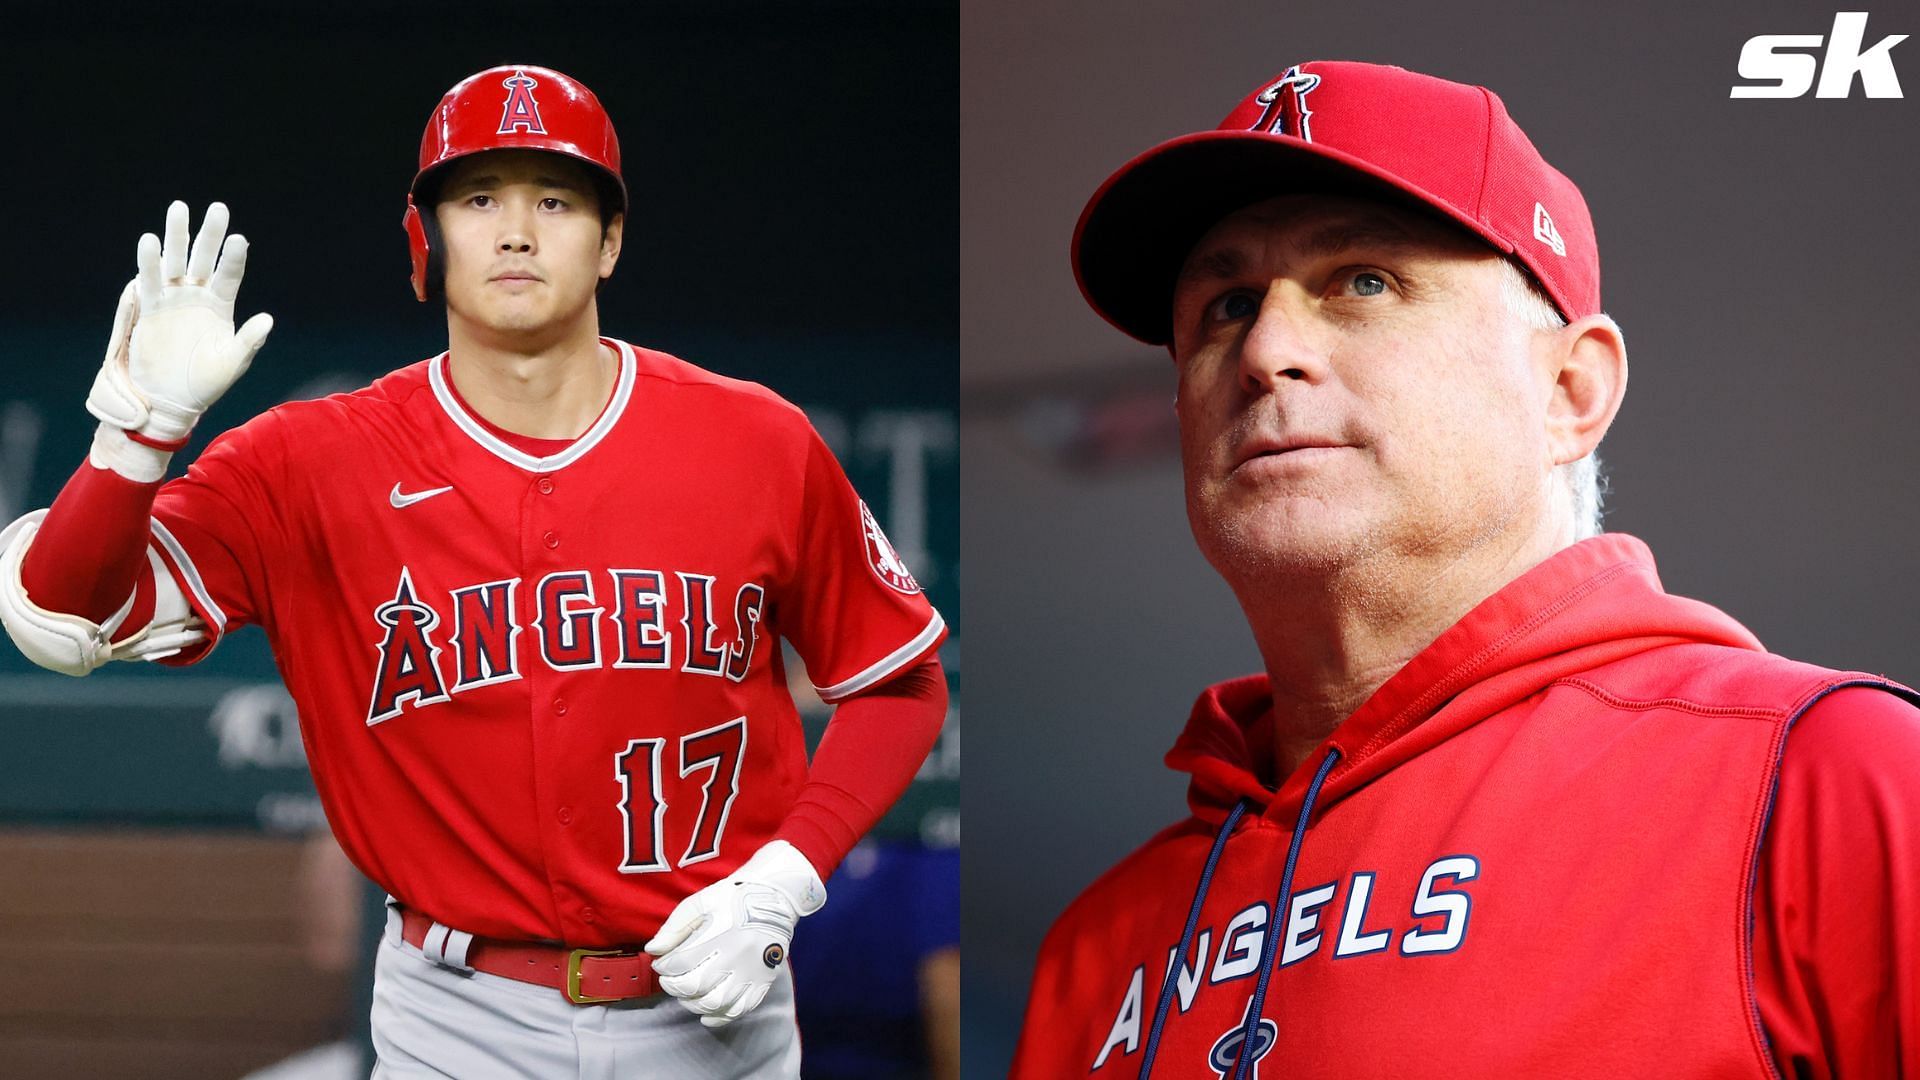 Shohei Ohtani and Phil Nevin of the Los Angeles Angels